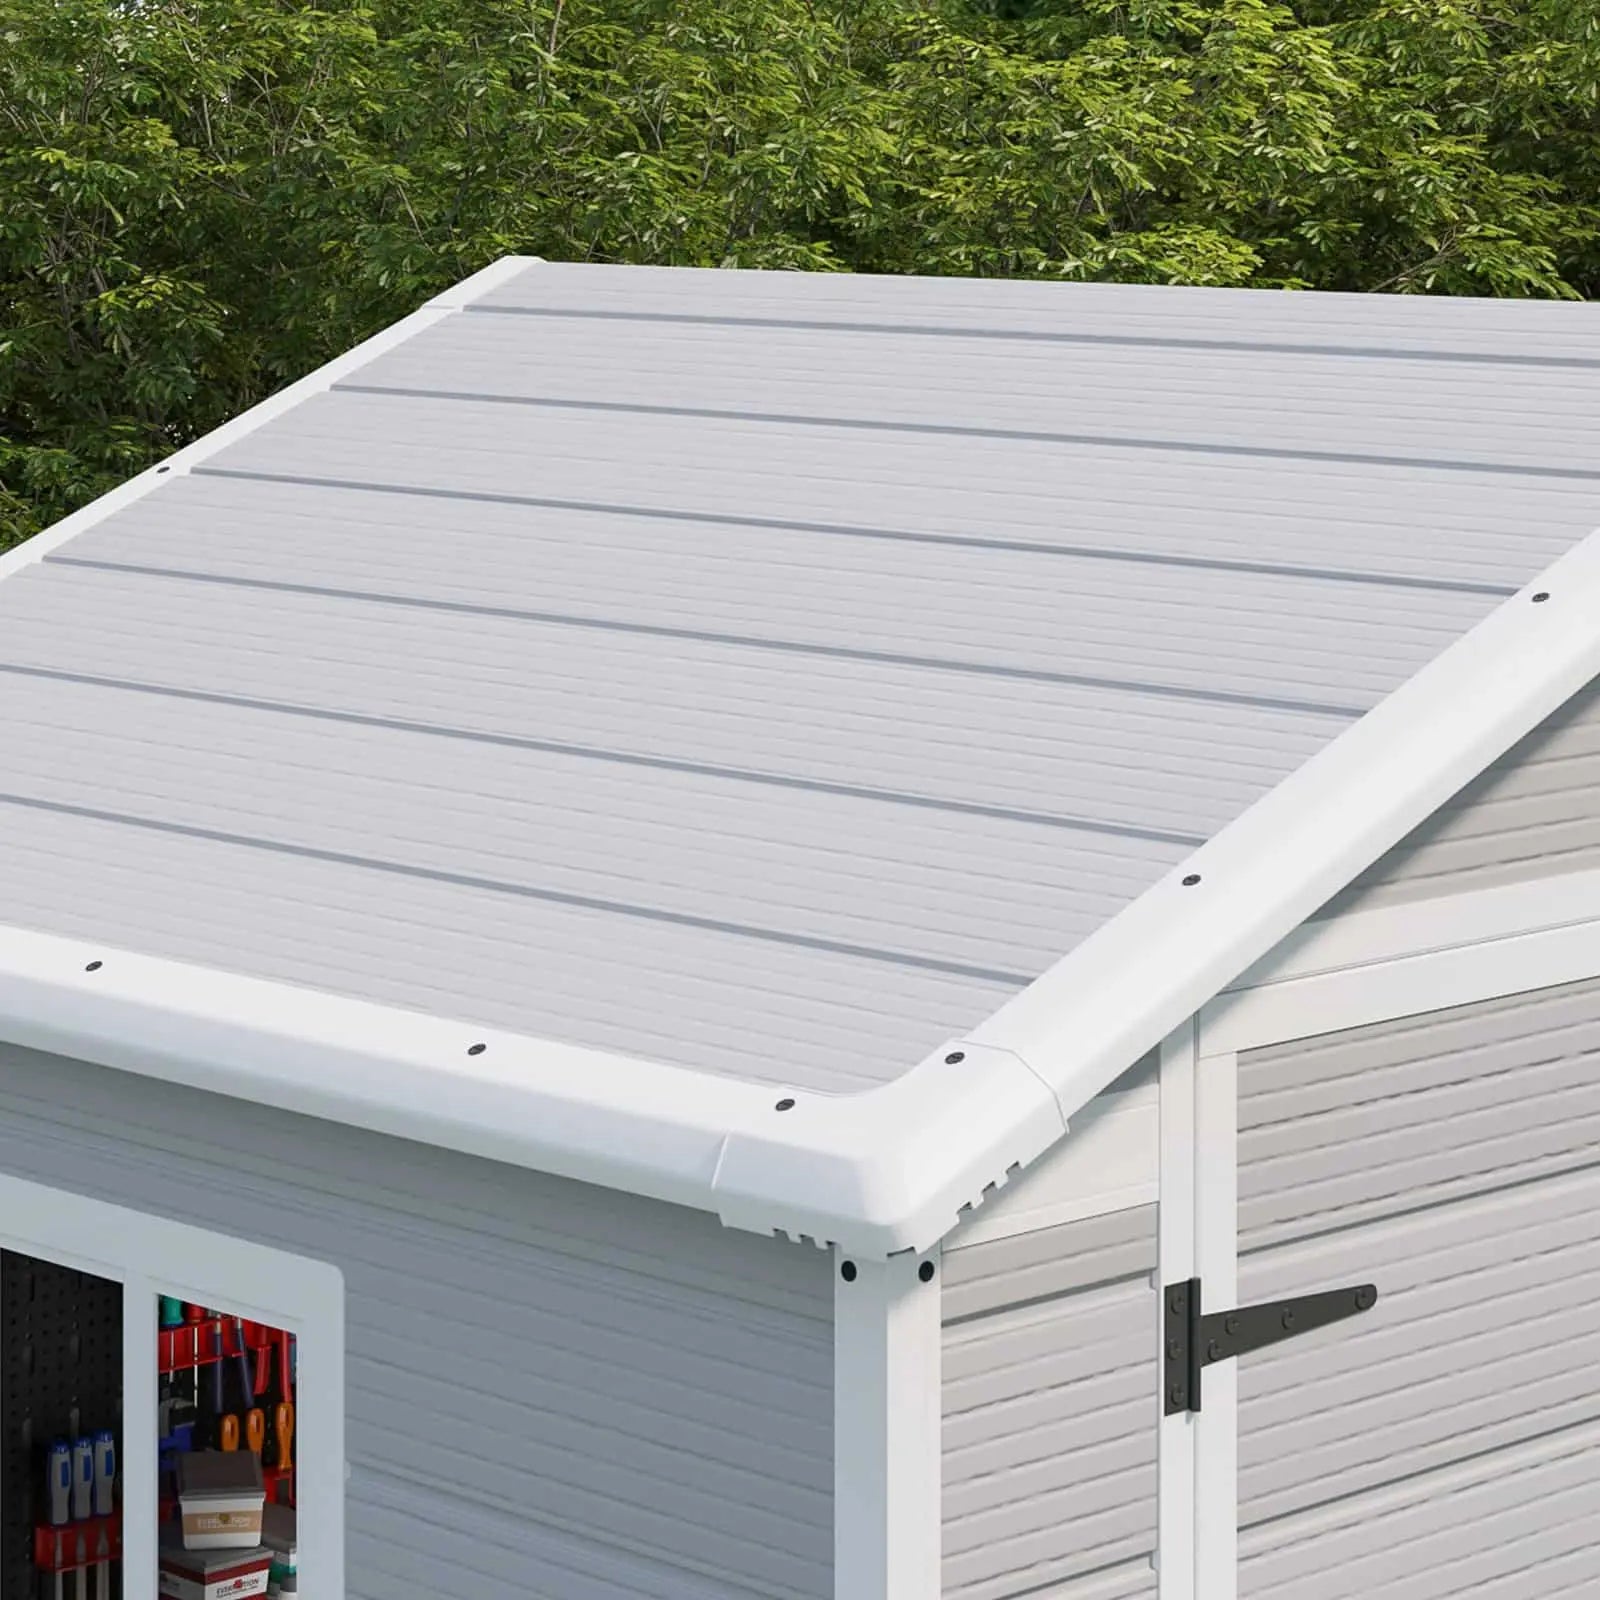 Patiowell 6x4 Plastic Shed-Roof